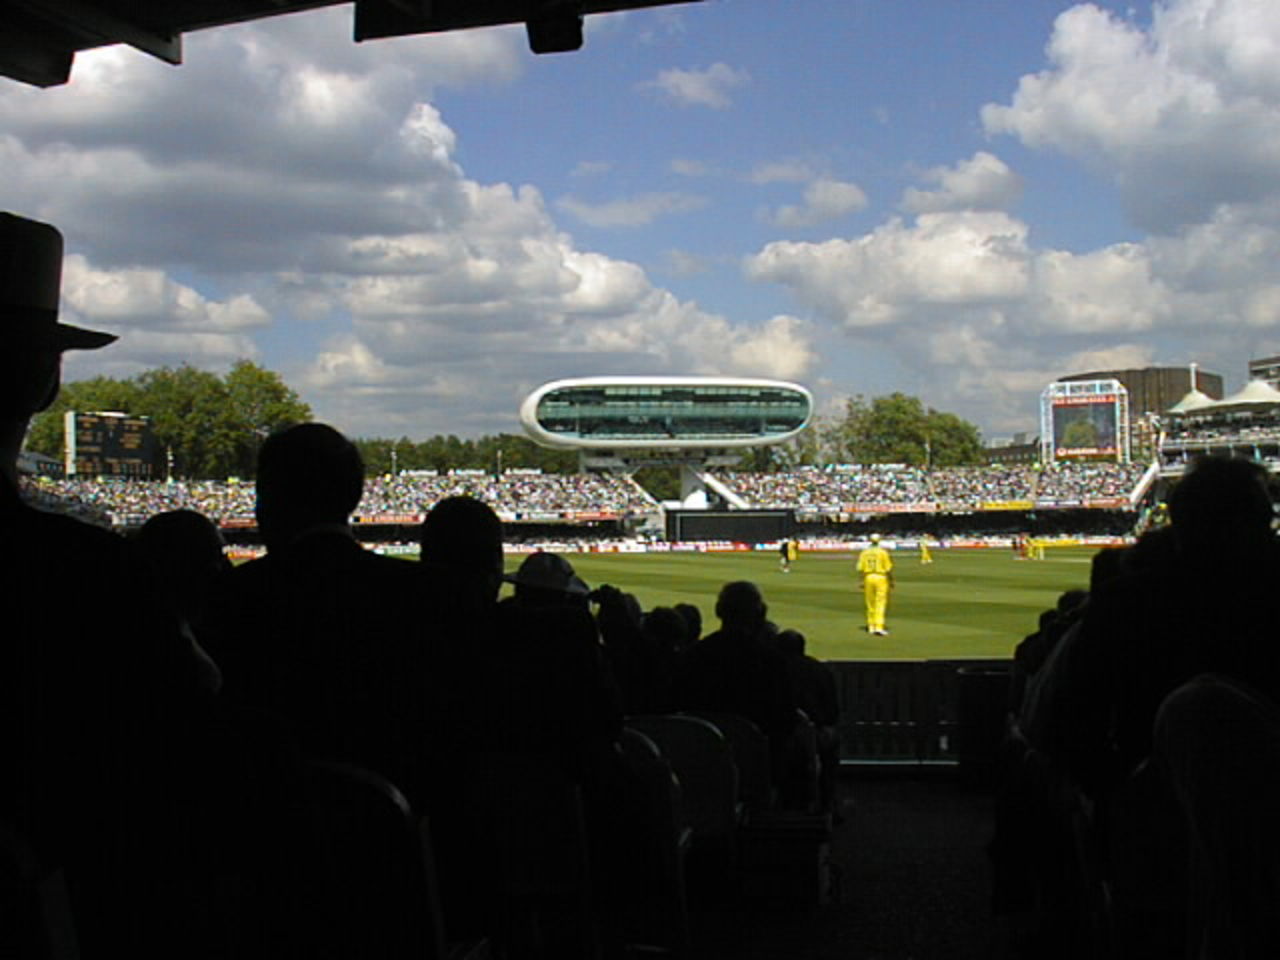 A view of The Lords cricket ground with the new Media Centre and large video screen